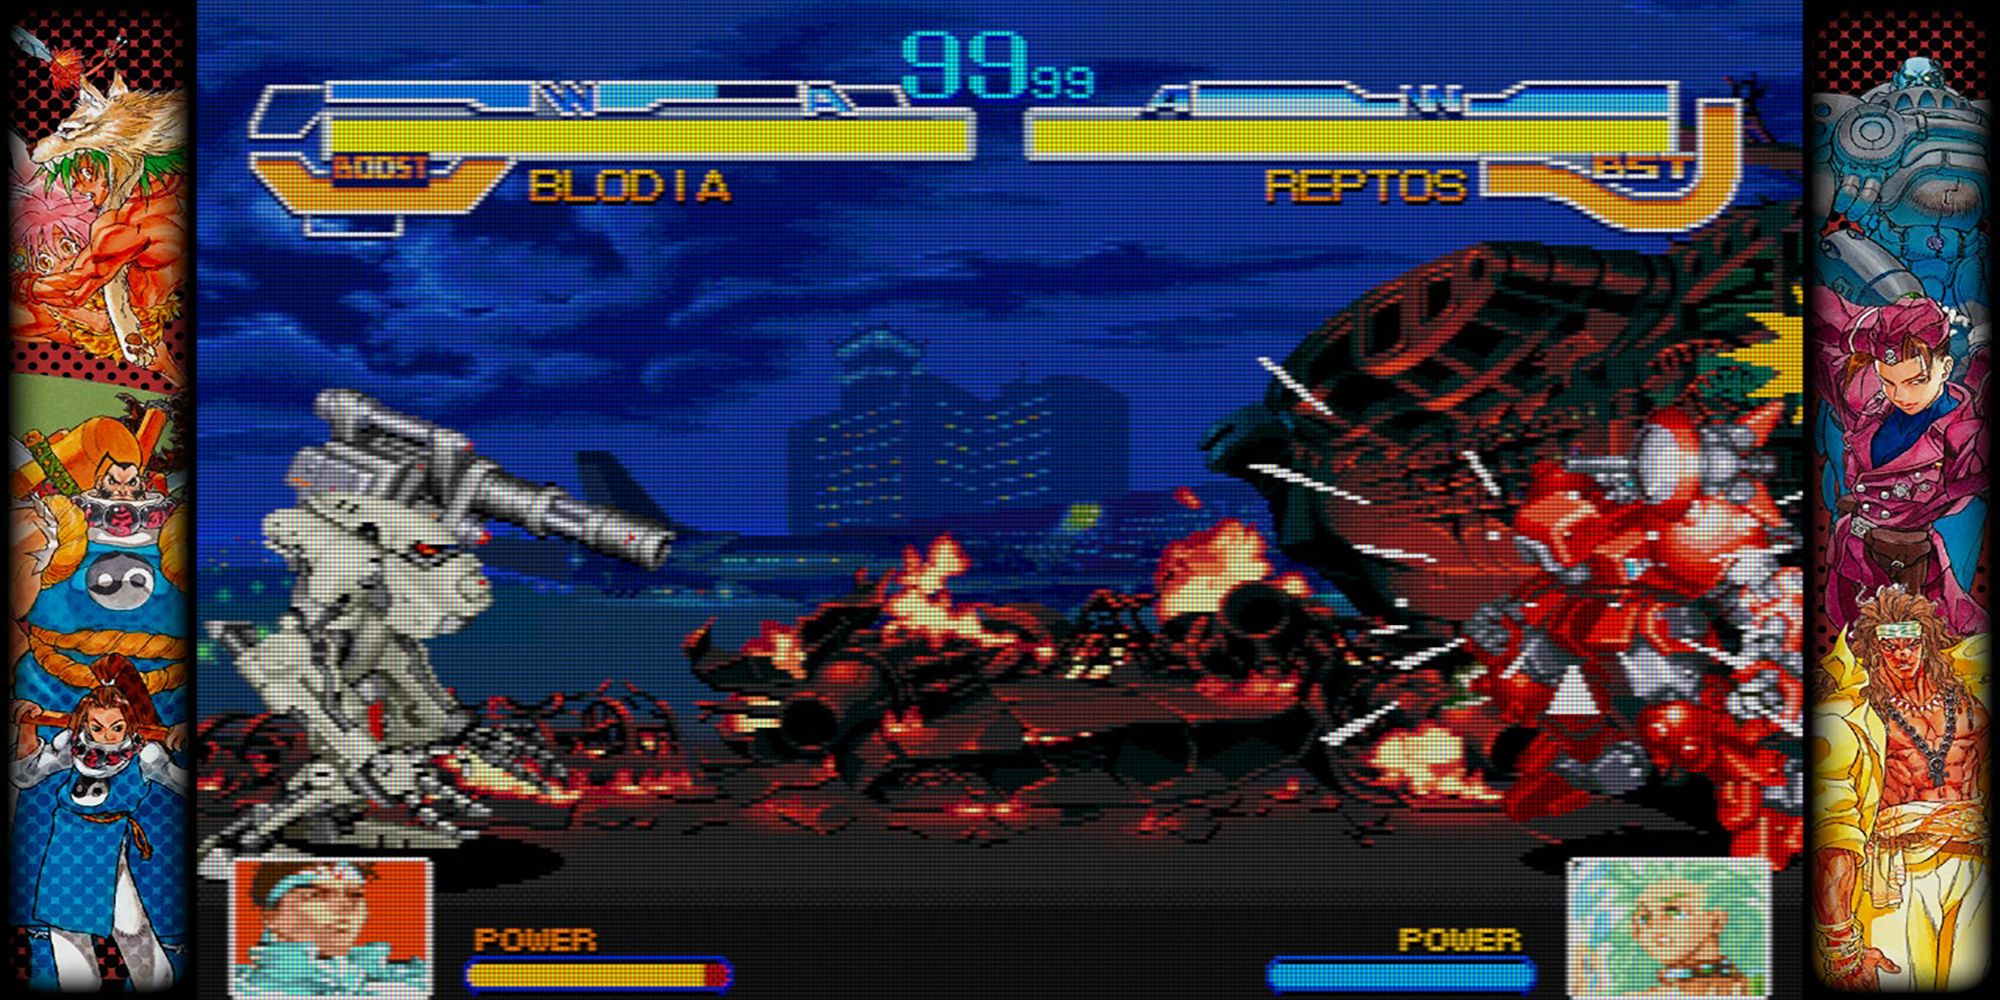 Blodia super charges its power gauge in a battle against Reptos at an airport in Cyberbots, a game in Capcom Fighting Collection.